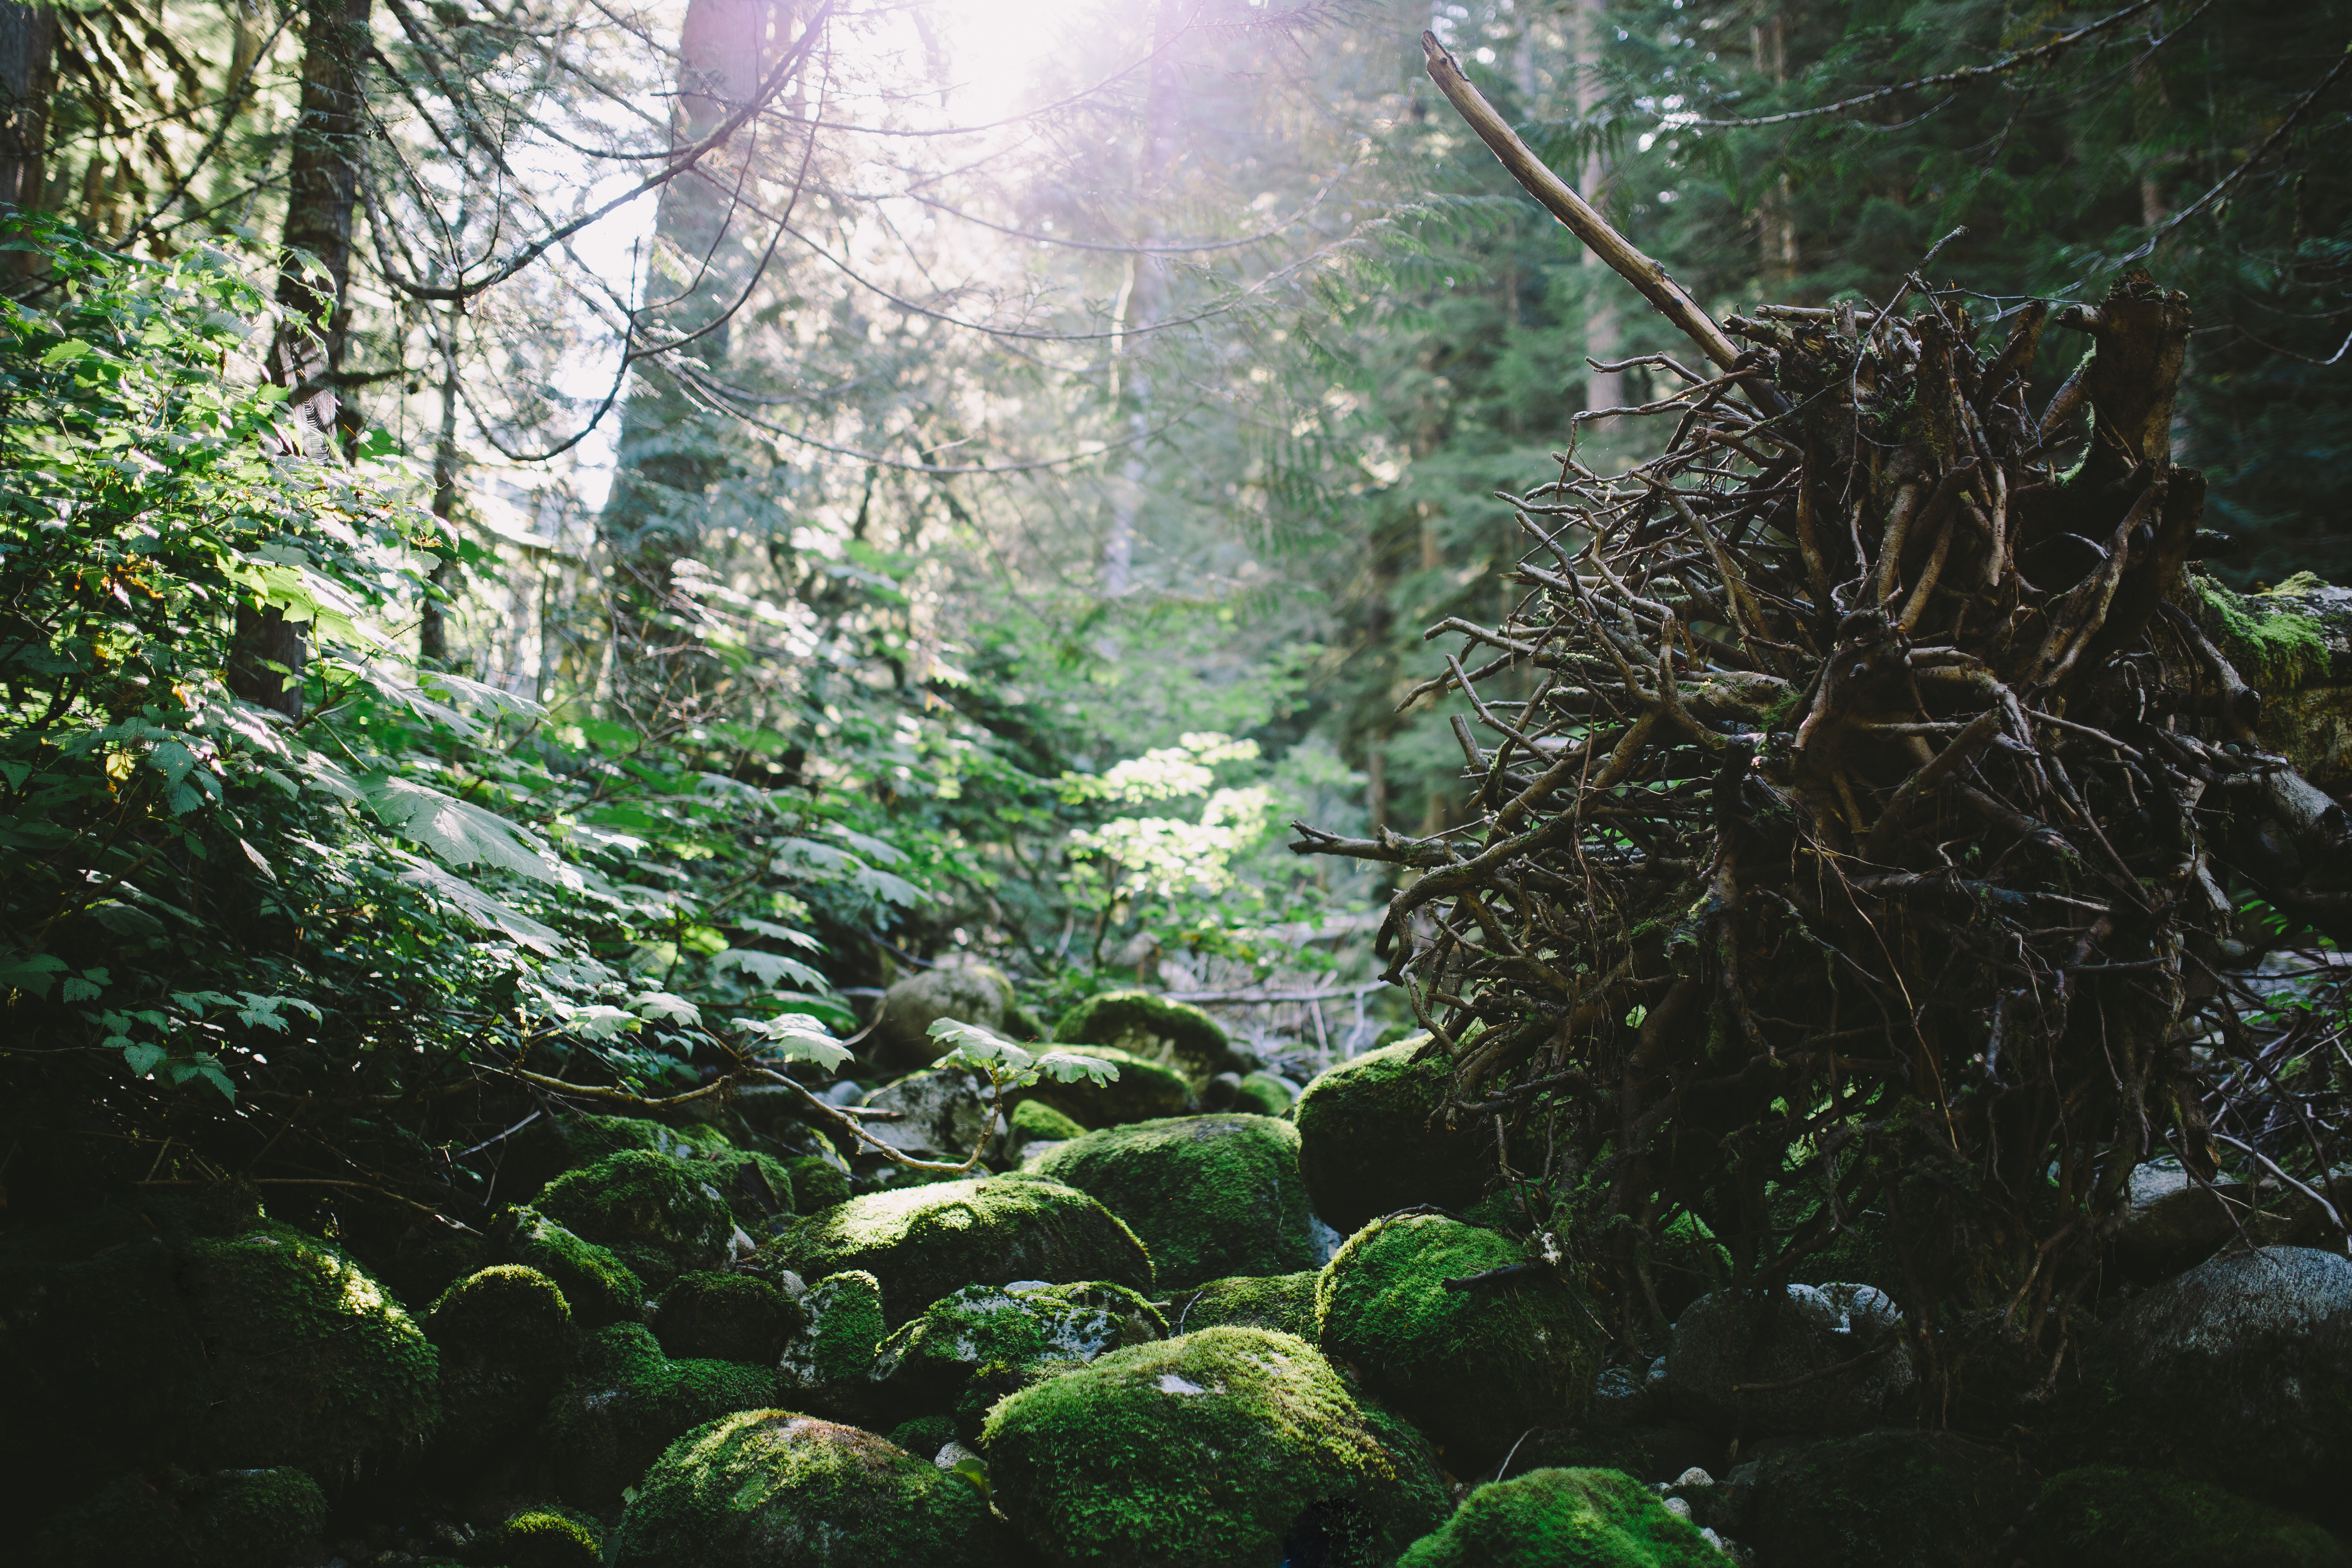 Rocks covered with moss in the forest